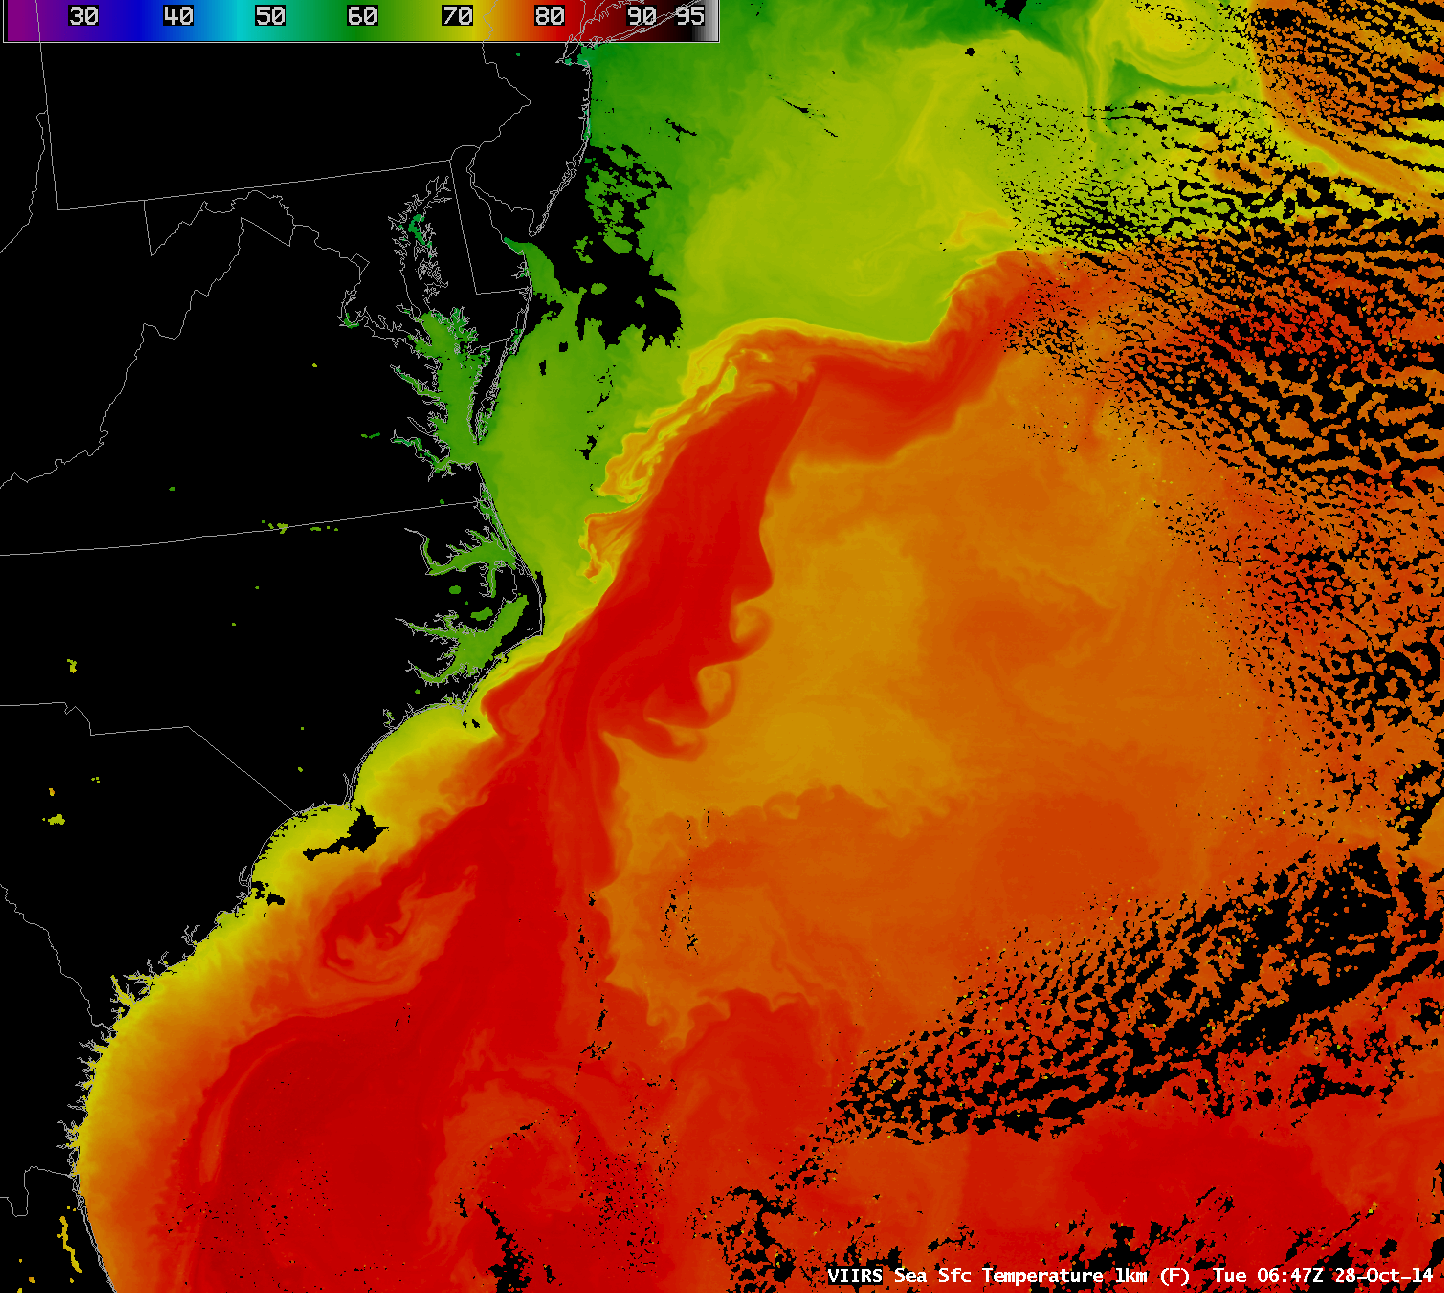 Suomi NPP VIIRS Sea Surface Temperature product (click to enlarge)